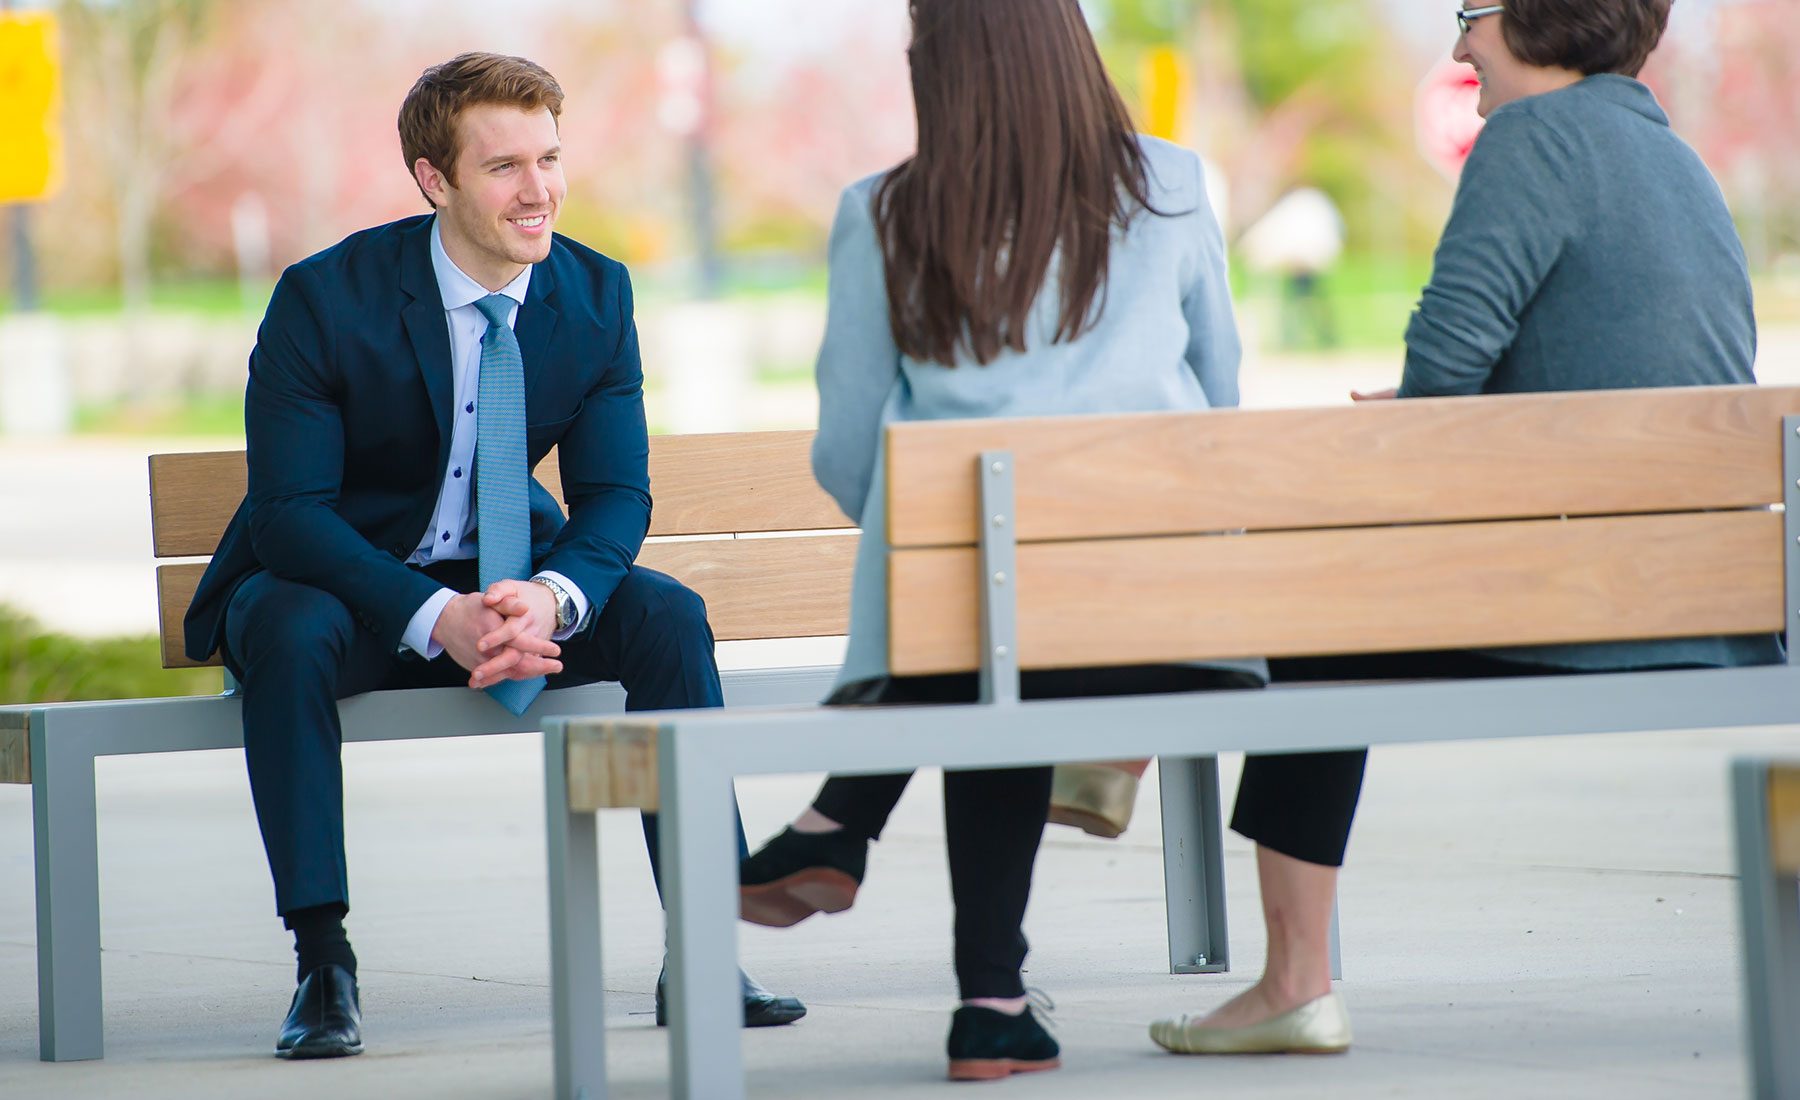 Three students dressed in business attire sitting out on benches 